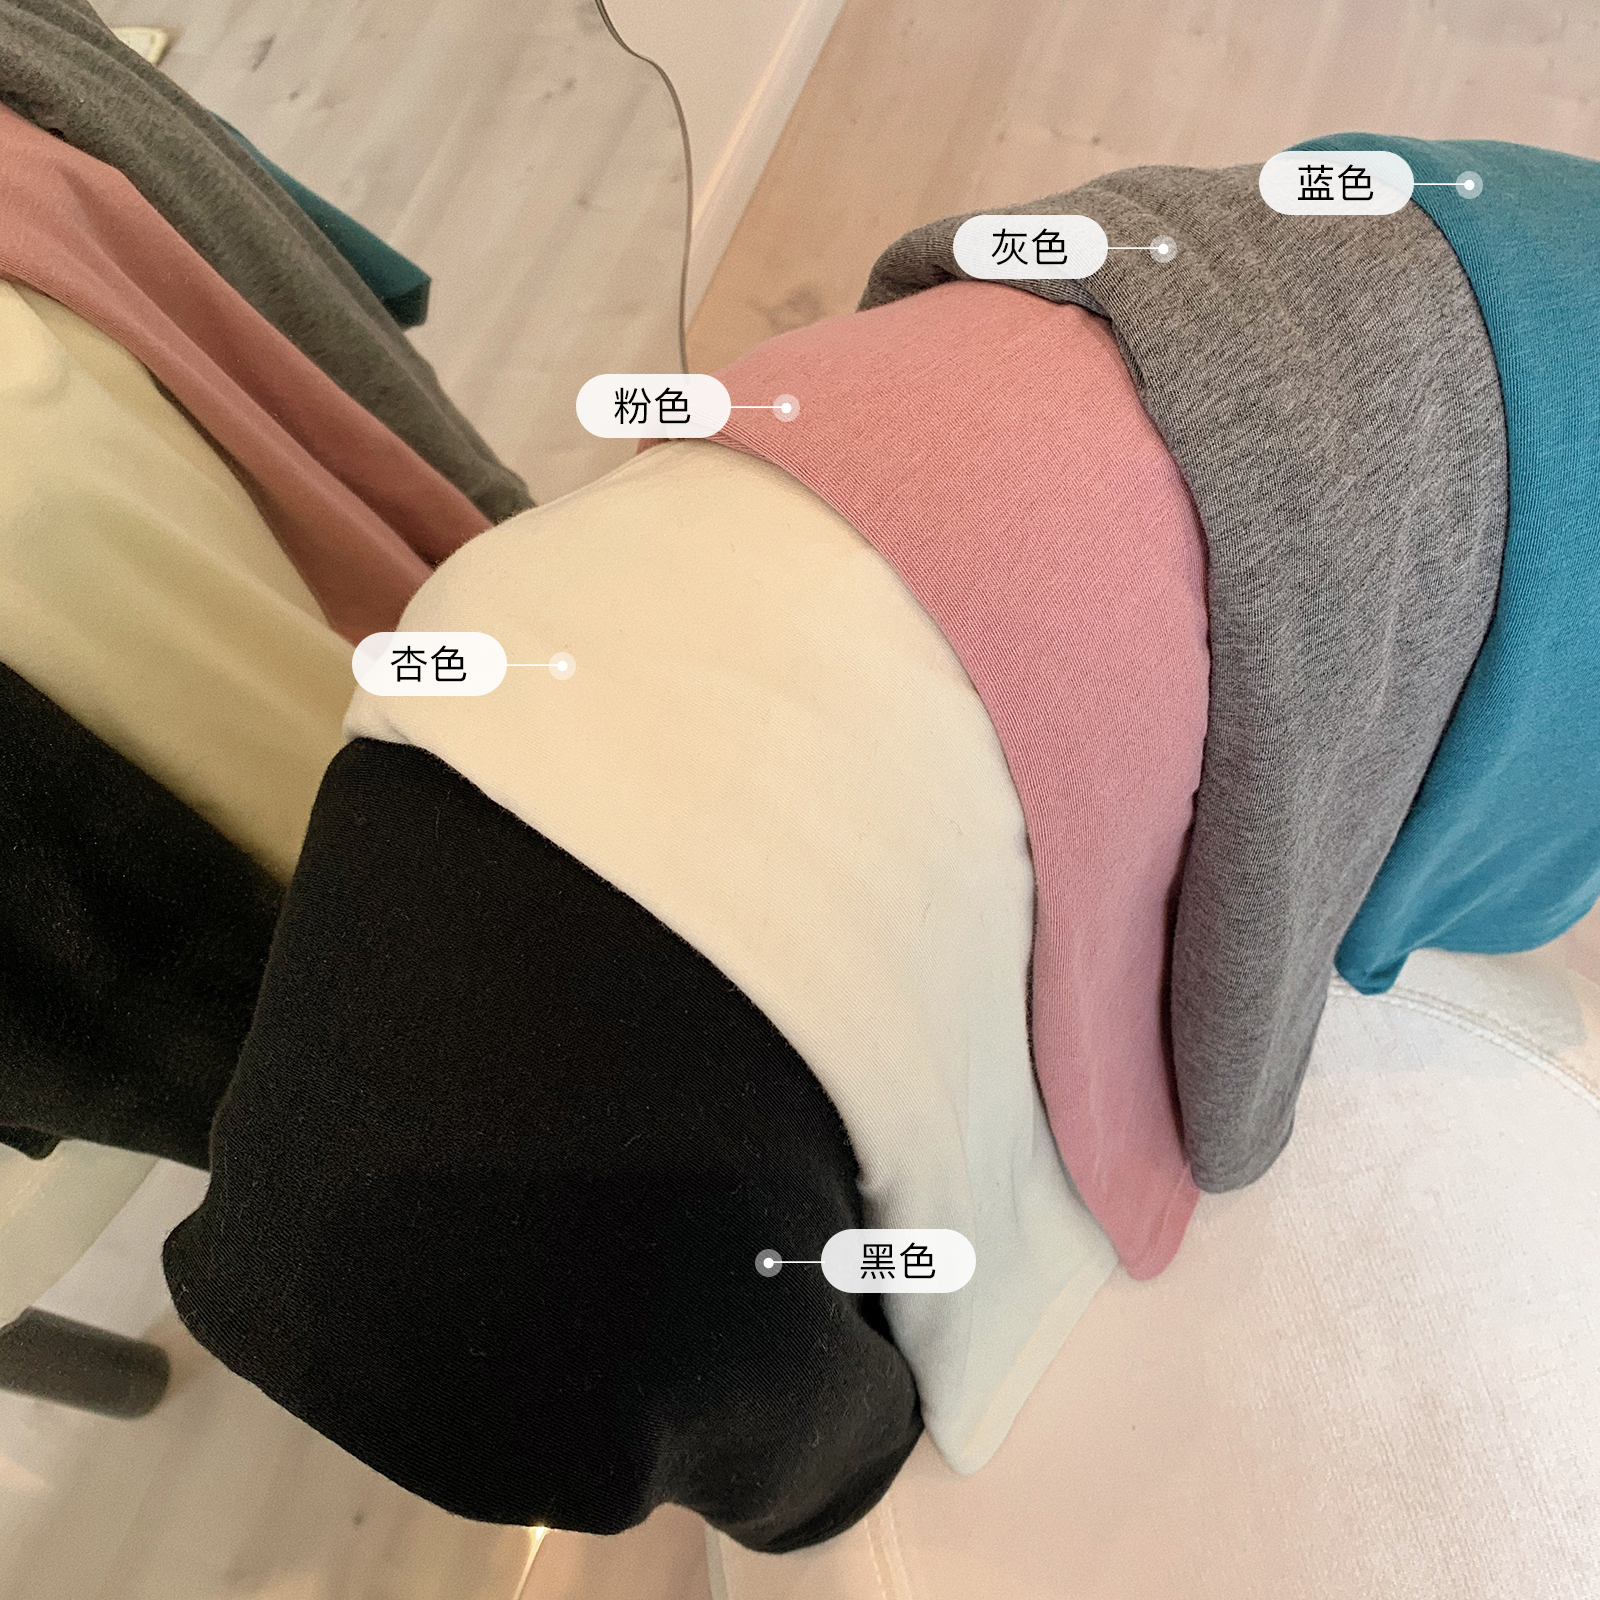 Autumn and winter long sleeve pile up collar bottoming sweater women's wool high neck ragged sweater versatile warm top